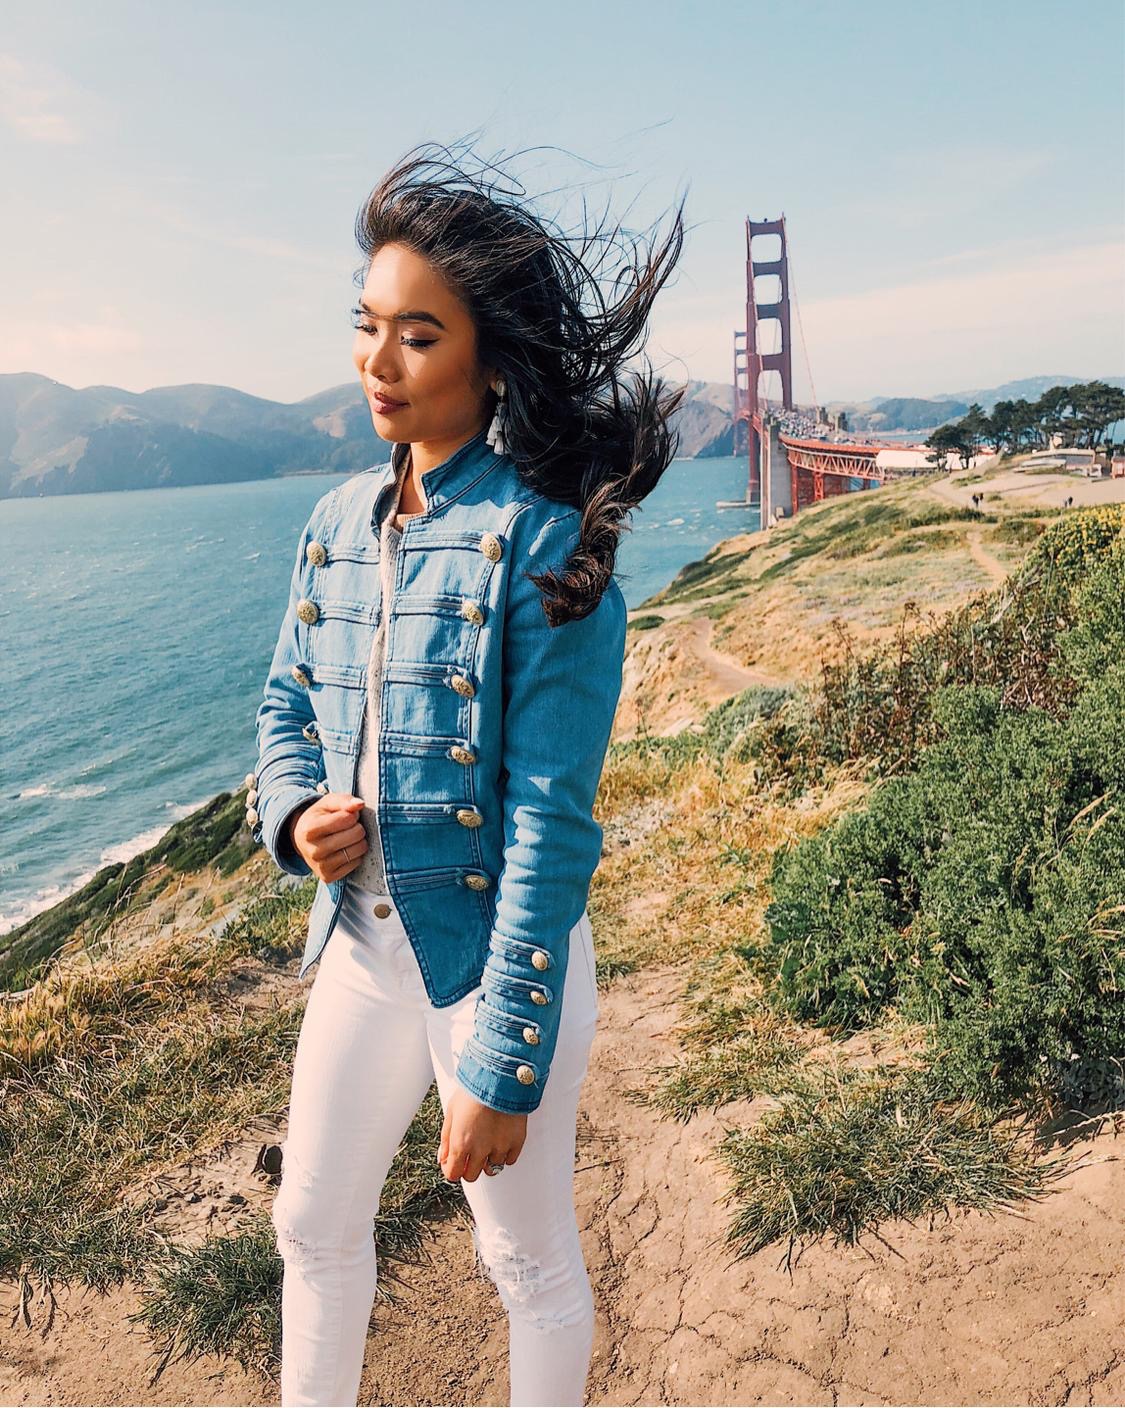 Best view of the Golden Gate Bridge wearing white jeans and a denim military jacket